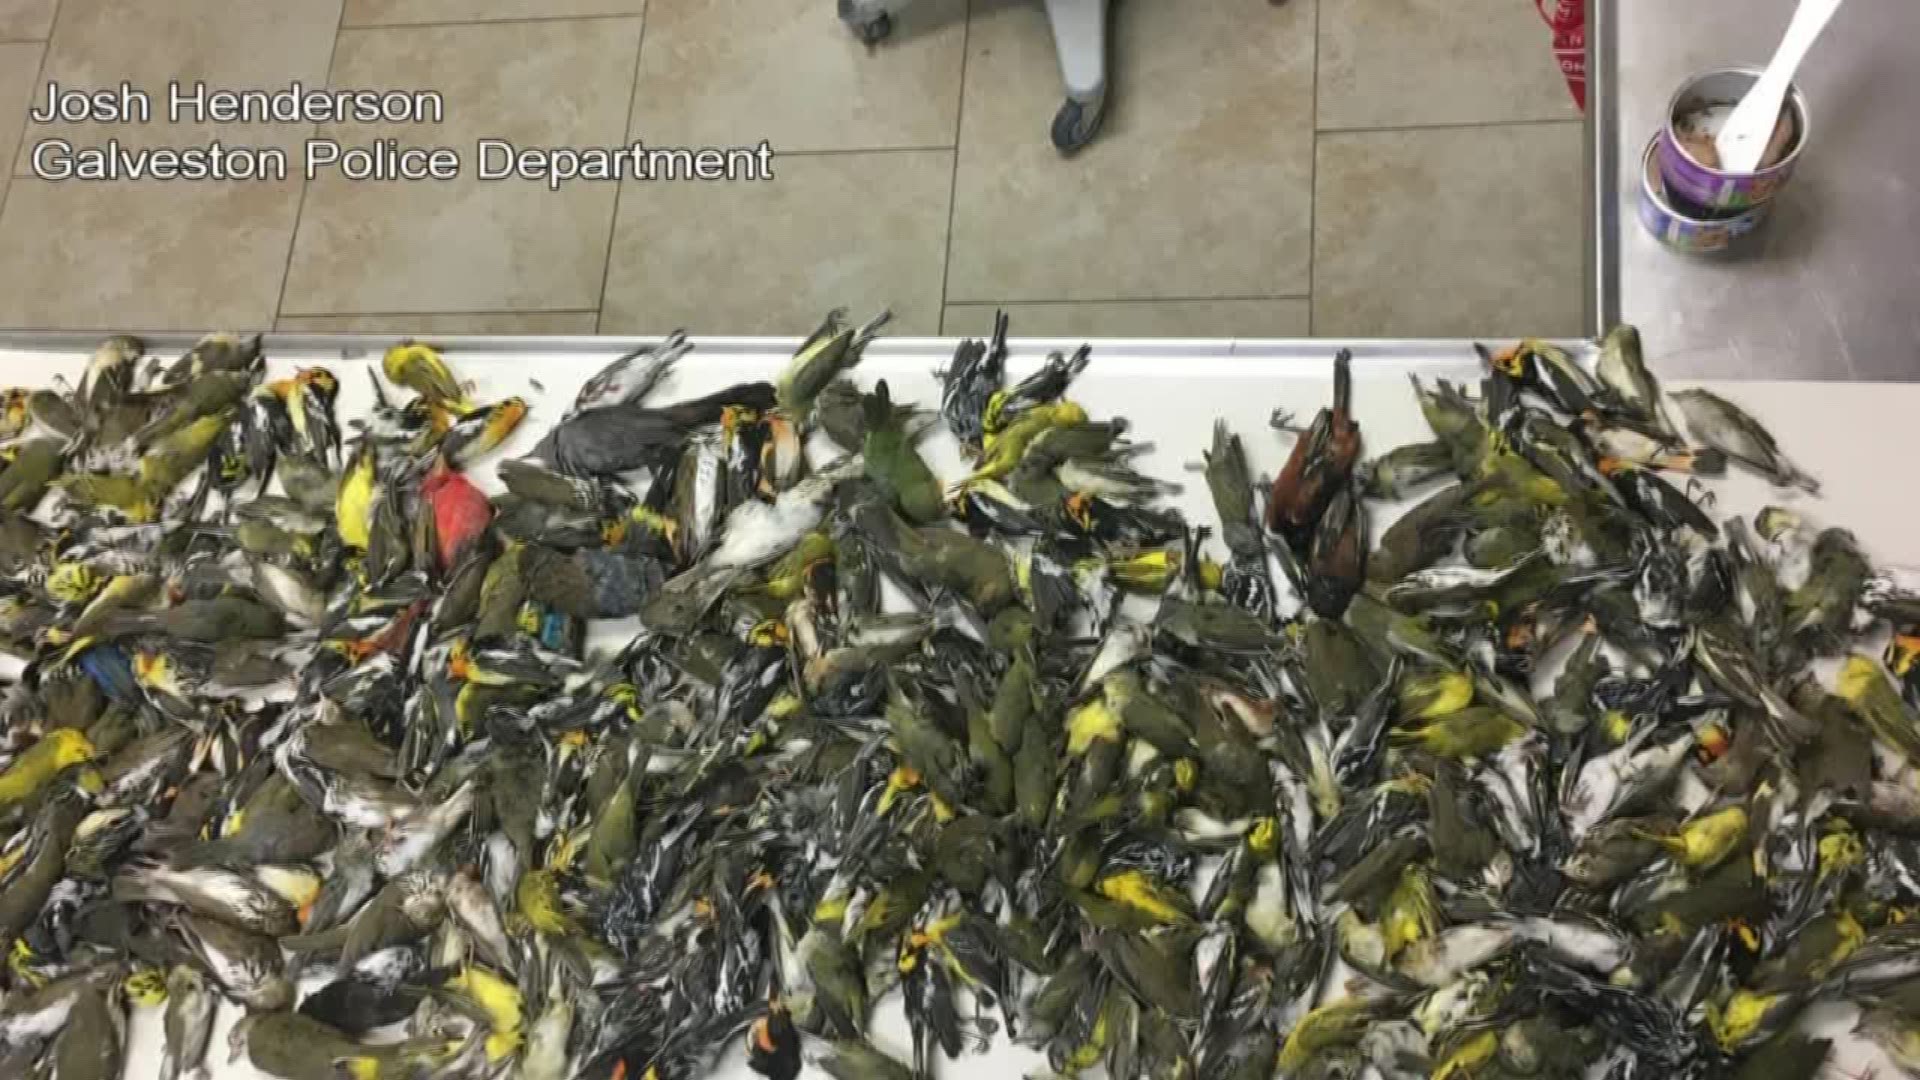 More than 300 migratory birds were found dead in Galveston after experts say they flew into a skyscraper Thursday evening.